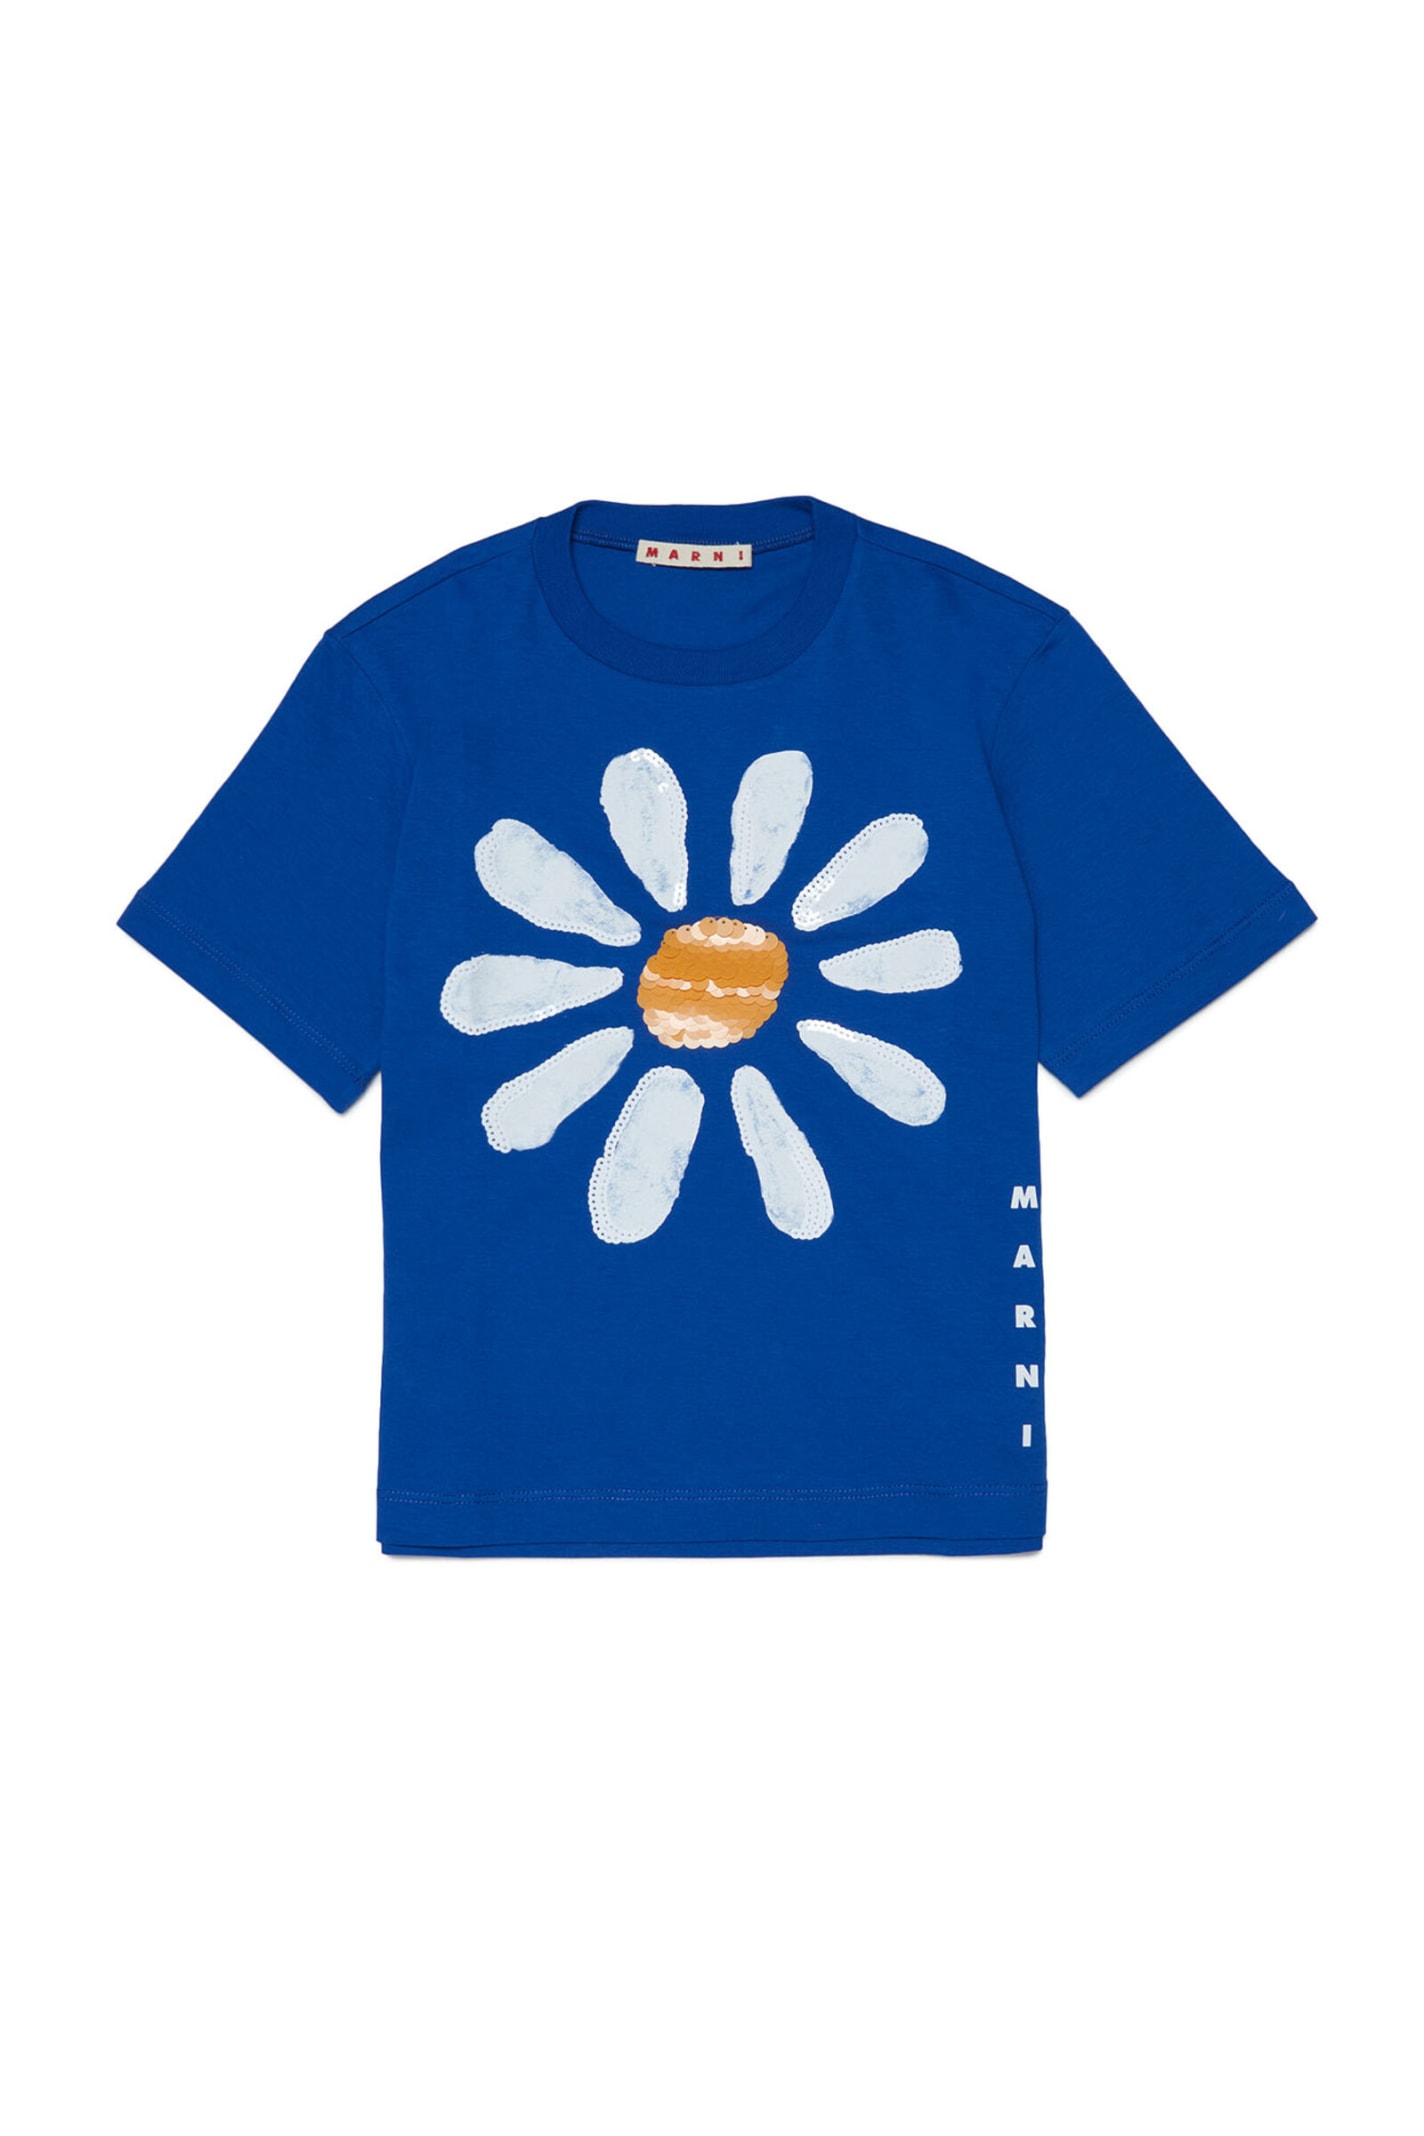 MARNI MT216F T-SHIRT MARNI BLUE JERSEY T-SHIRT WITH FLORAL PRINT AND SEQUIN APPLIQUÉ